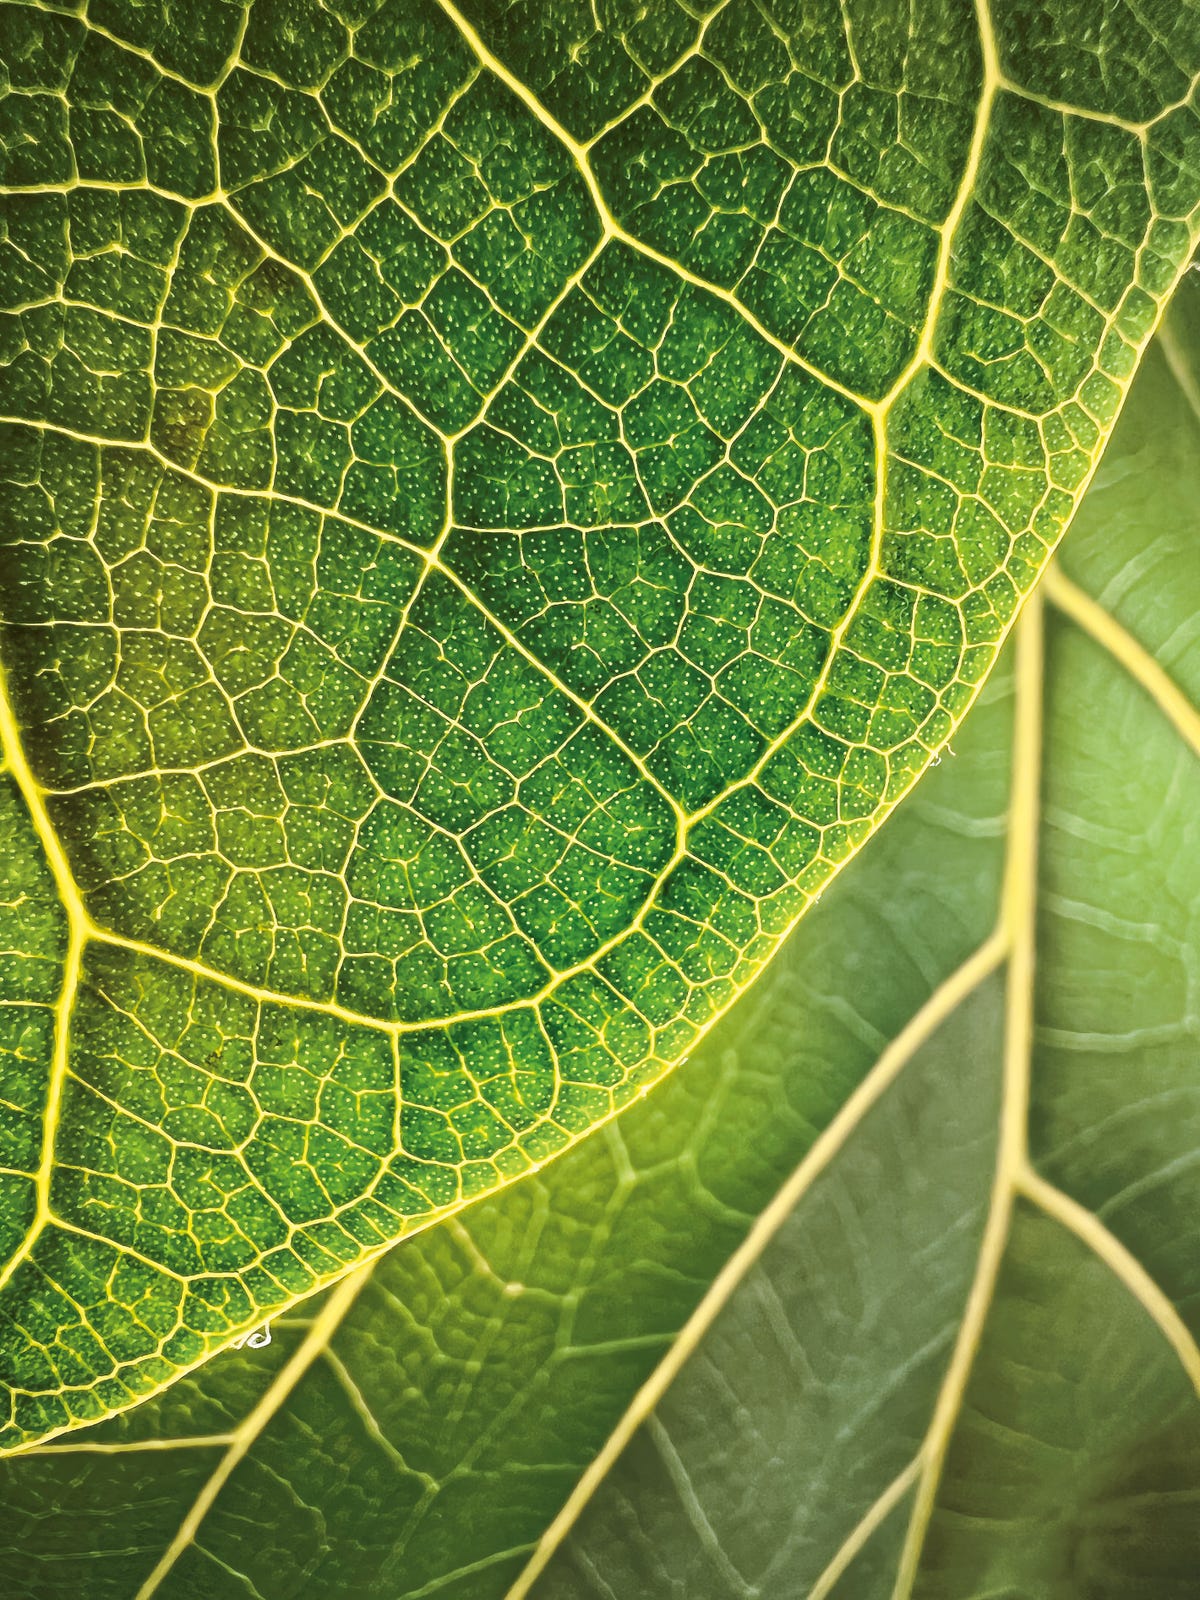 The veins of a leaf.